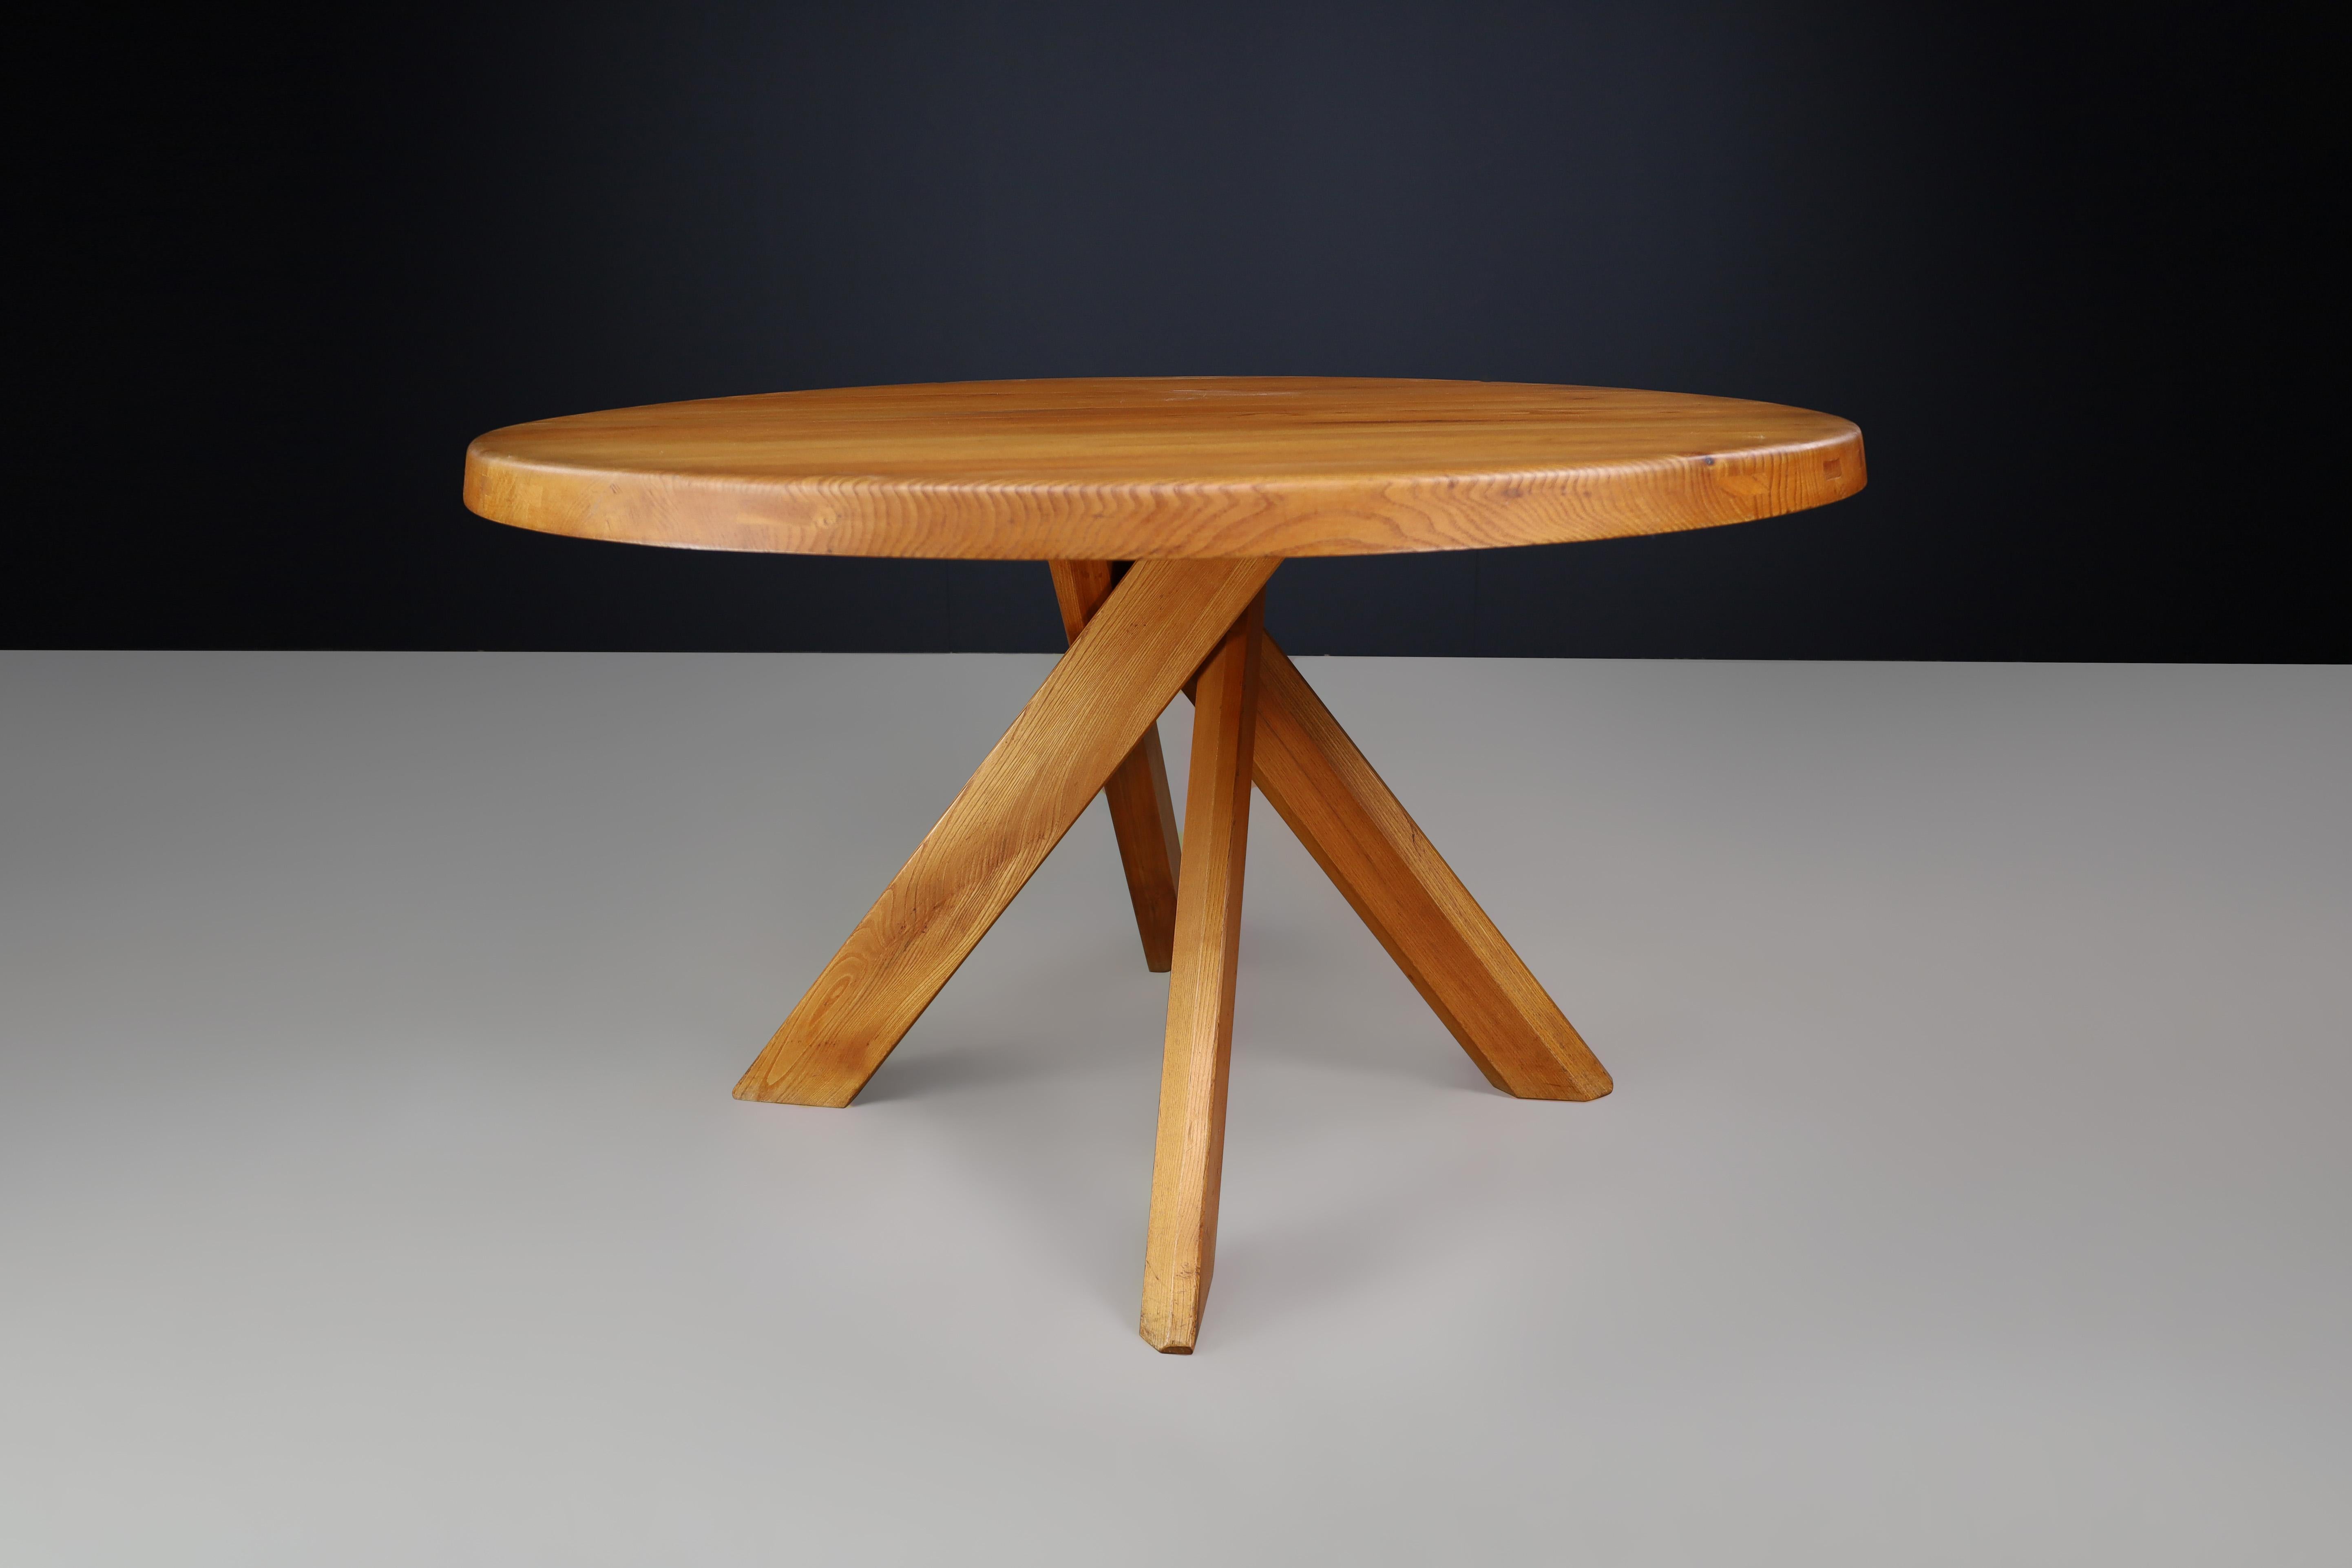 Pierre Chapo 'T21C' Sfax round dining table made of solid elm, France 1969

This original Pierre Chapo 'T21C' Sfax round dining table is made of solid elm and measures 128 cm in diameter. It features a thick top with natural veining and five crossed